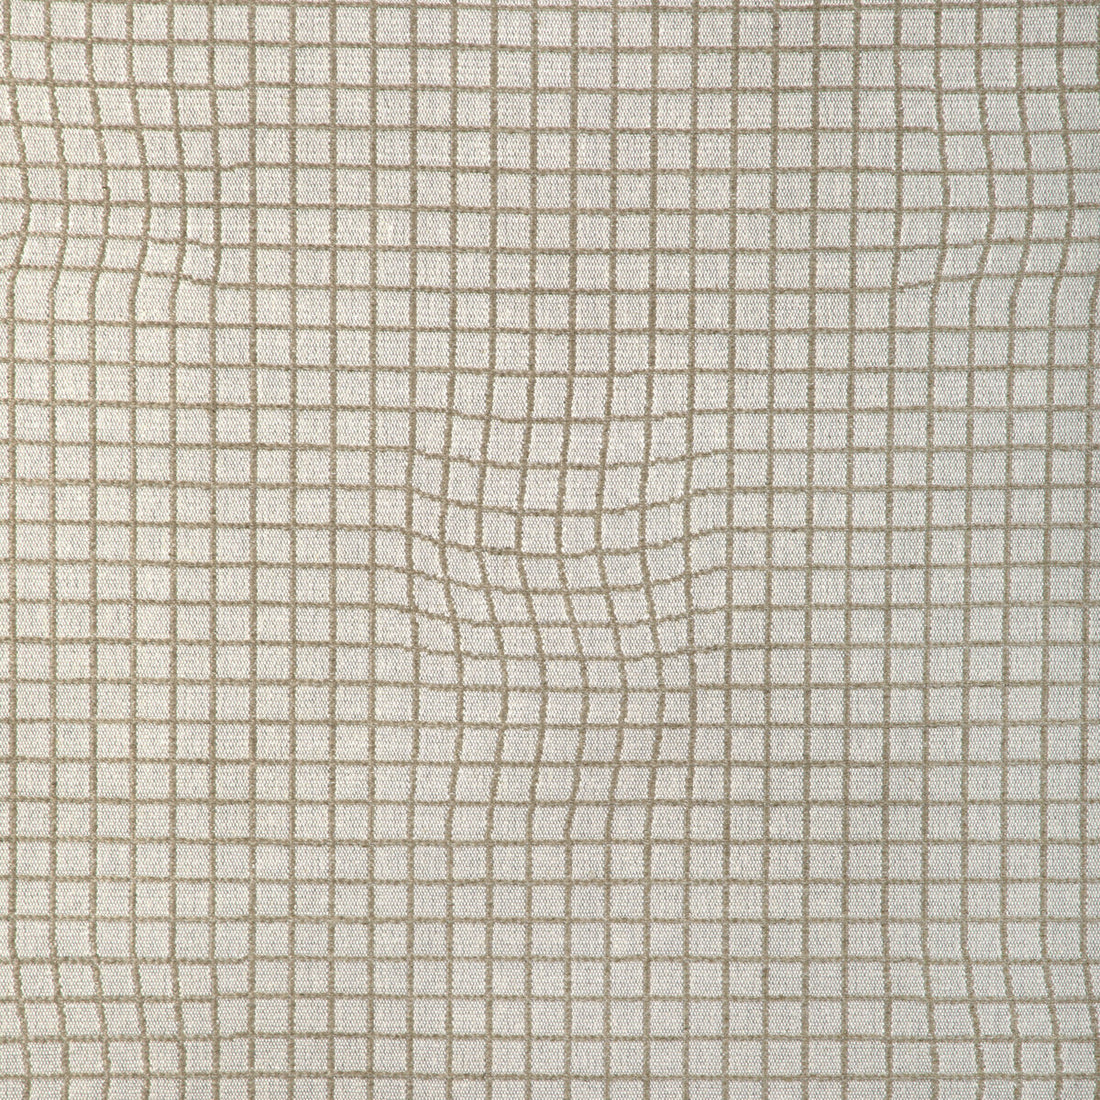 Armature fabric in linen color - pattern GWF-3792.16.0 - by Lee Jofa Modern in the Kelly Wearstler VII collection